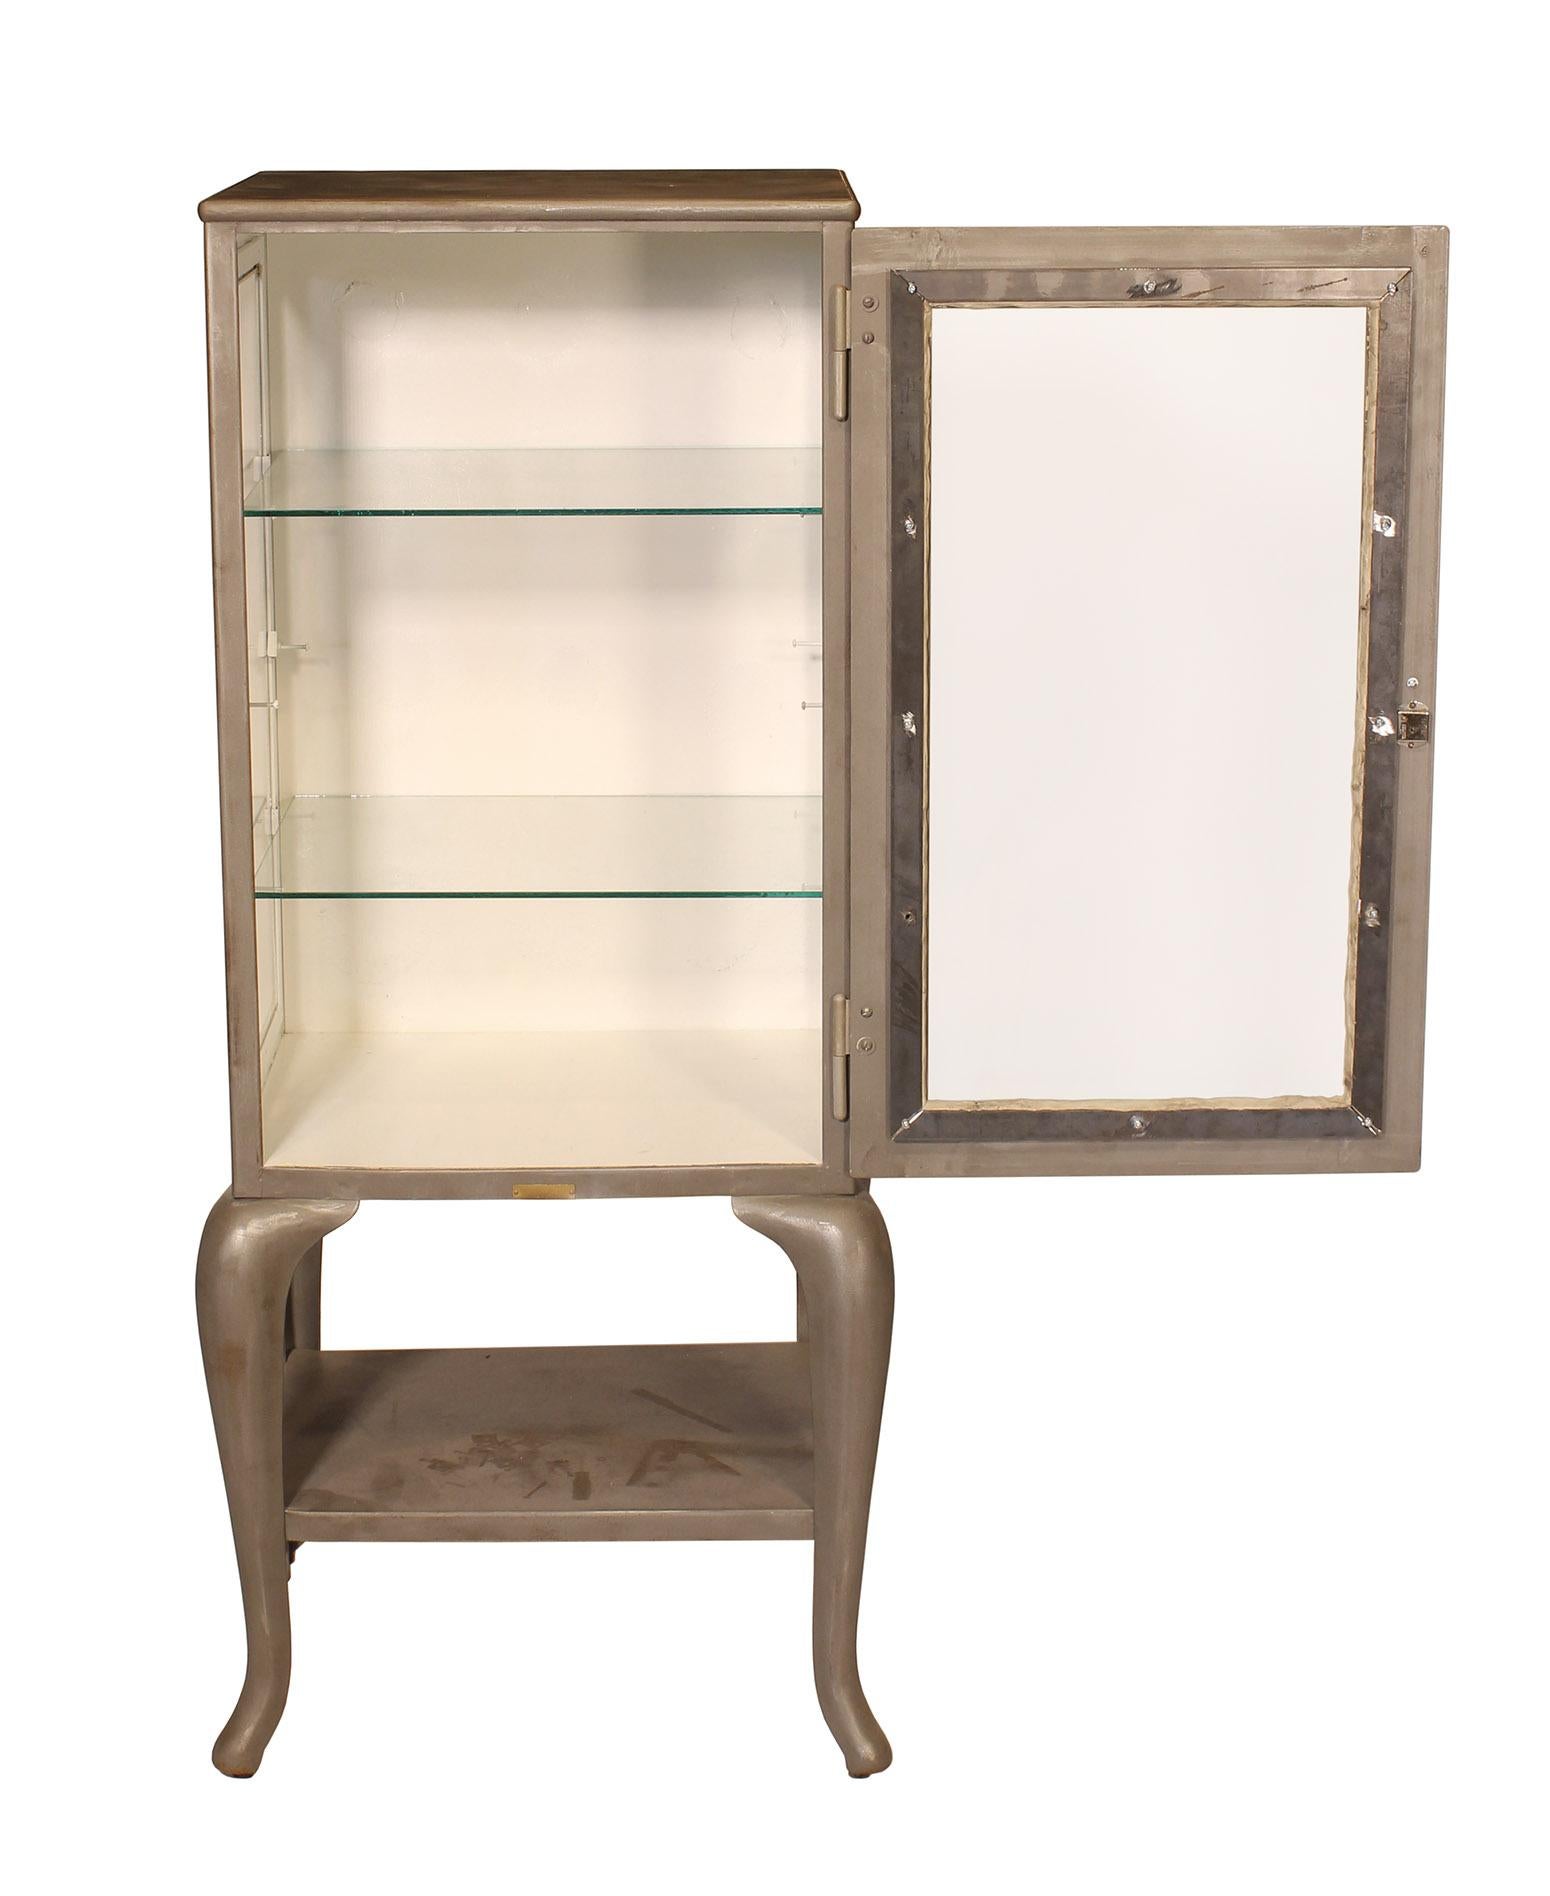 Authentic antique distressed metal and glass doctor's / medical / vitrine cabinet with cabriole legs and two glass shelves. Vintage steel / glass / cast iron storage cabinet is from the 1920s and all original. Cabinet measures 52 1/2